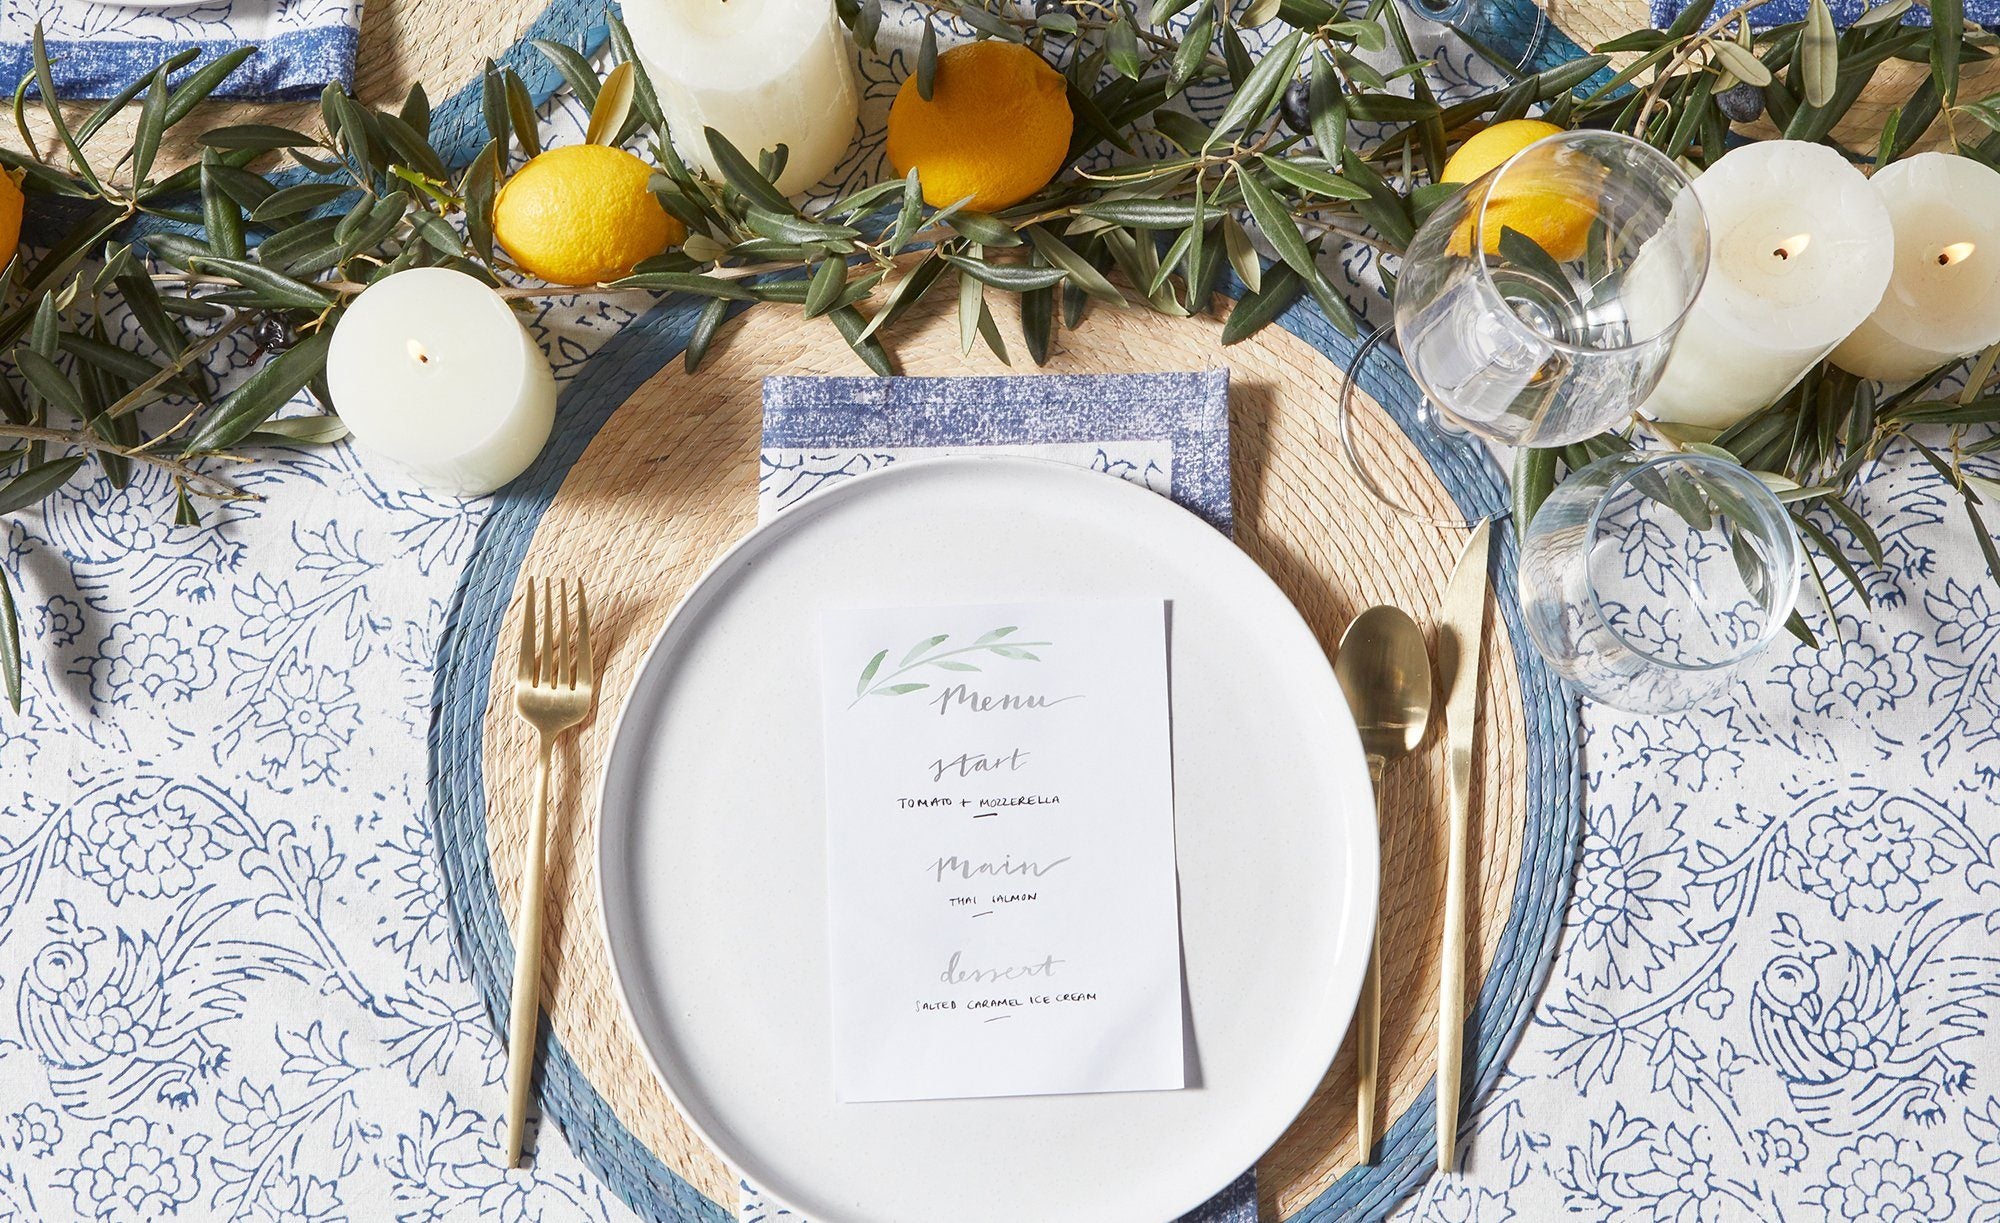 Get the Look | 3 Ways to Style a Wedding Table